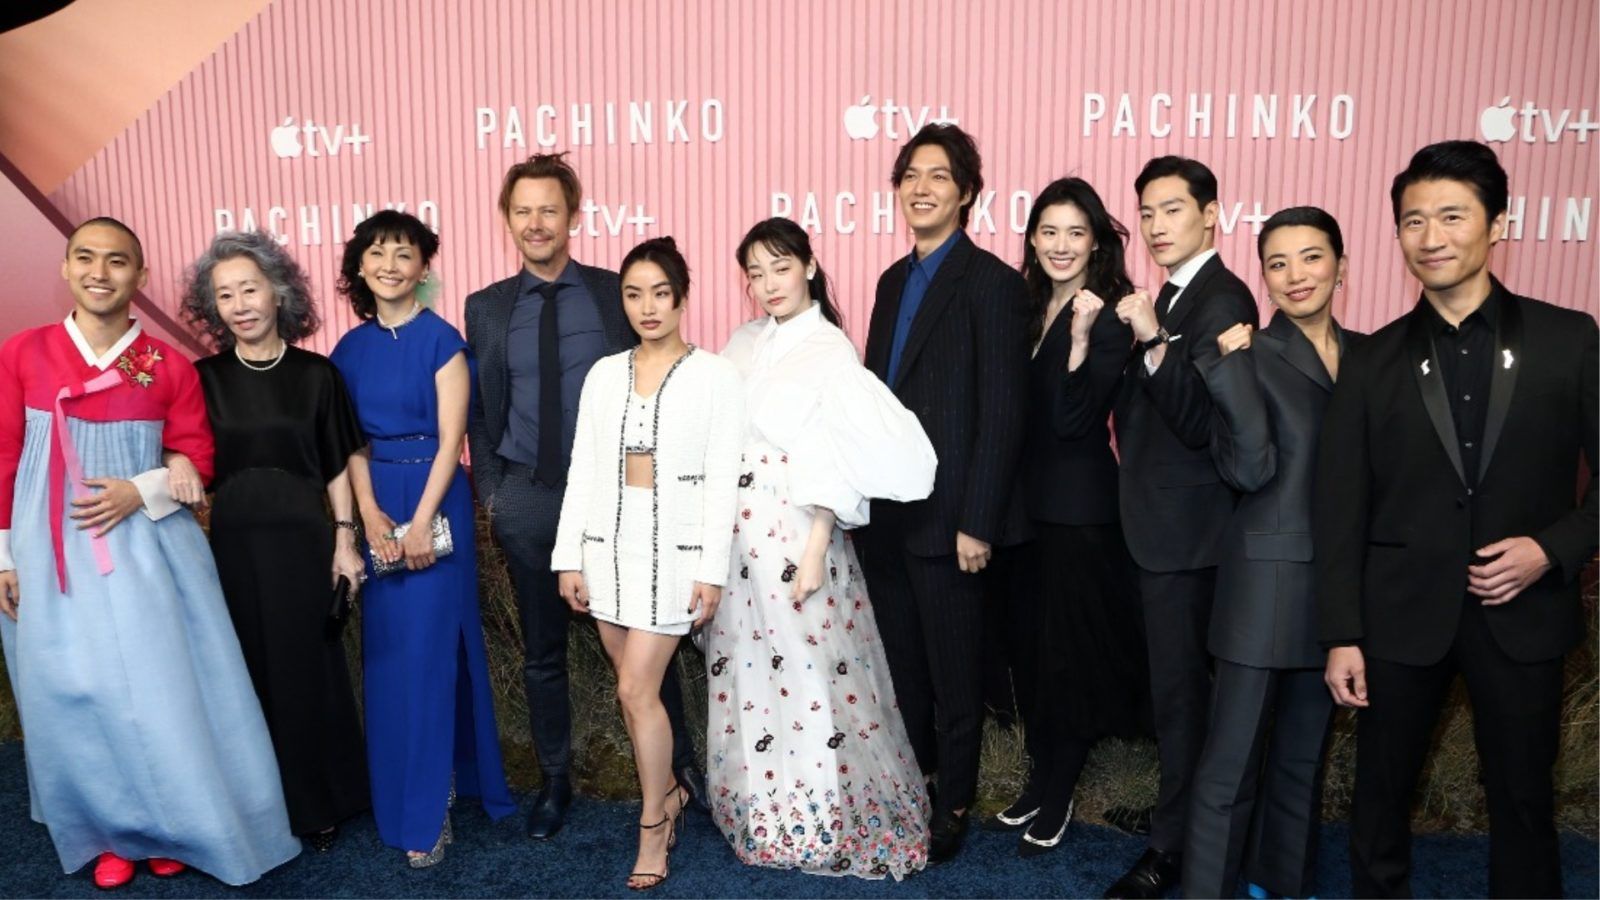 Photos and Videos: ‘Pachinko’ premiere in Los Angeles